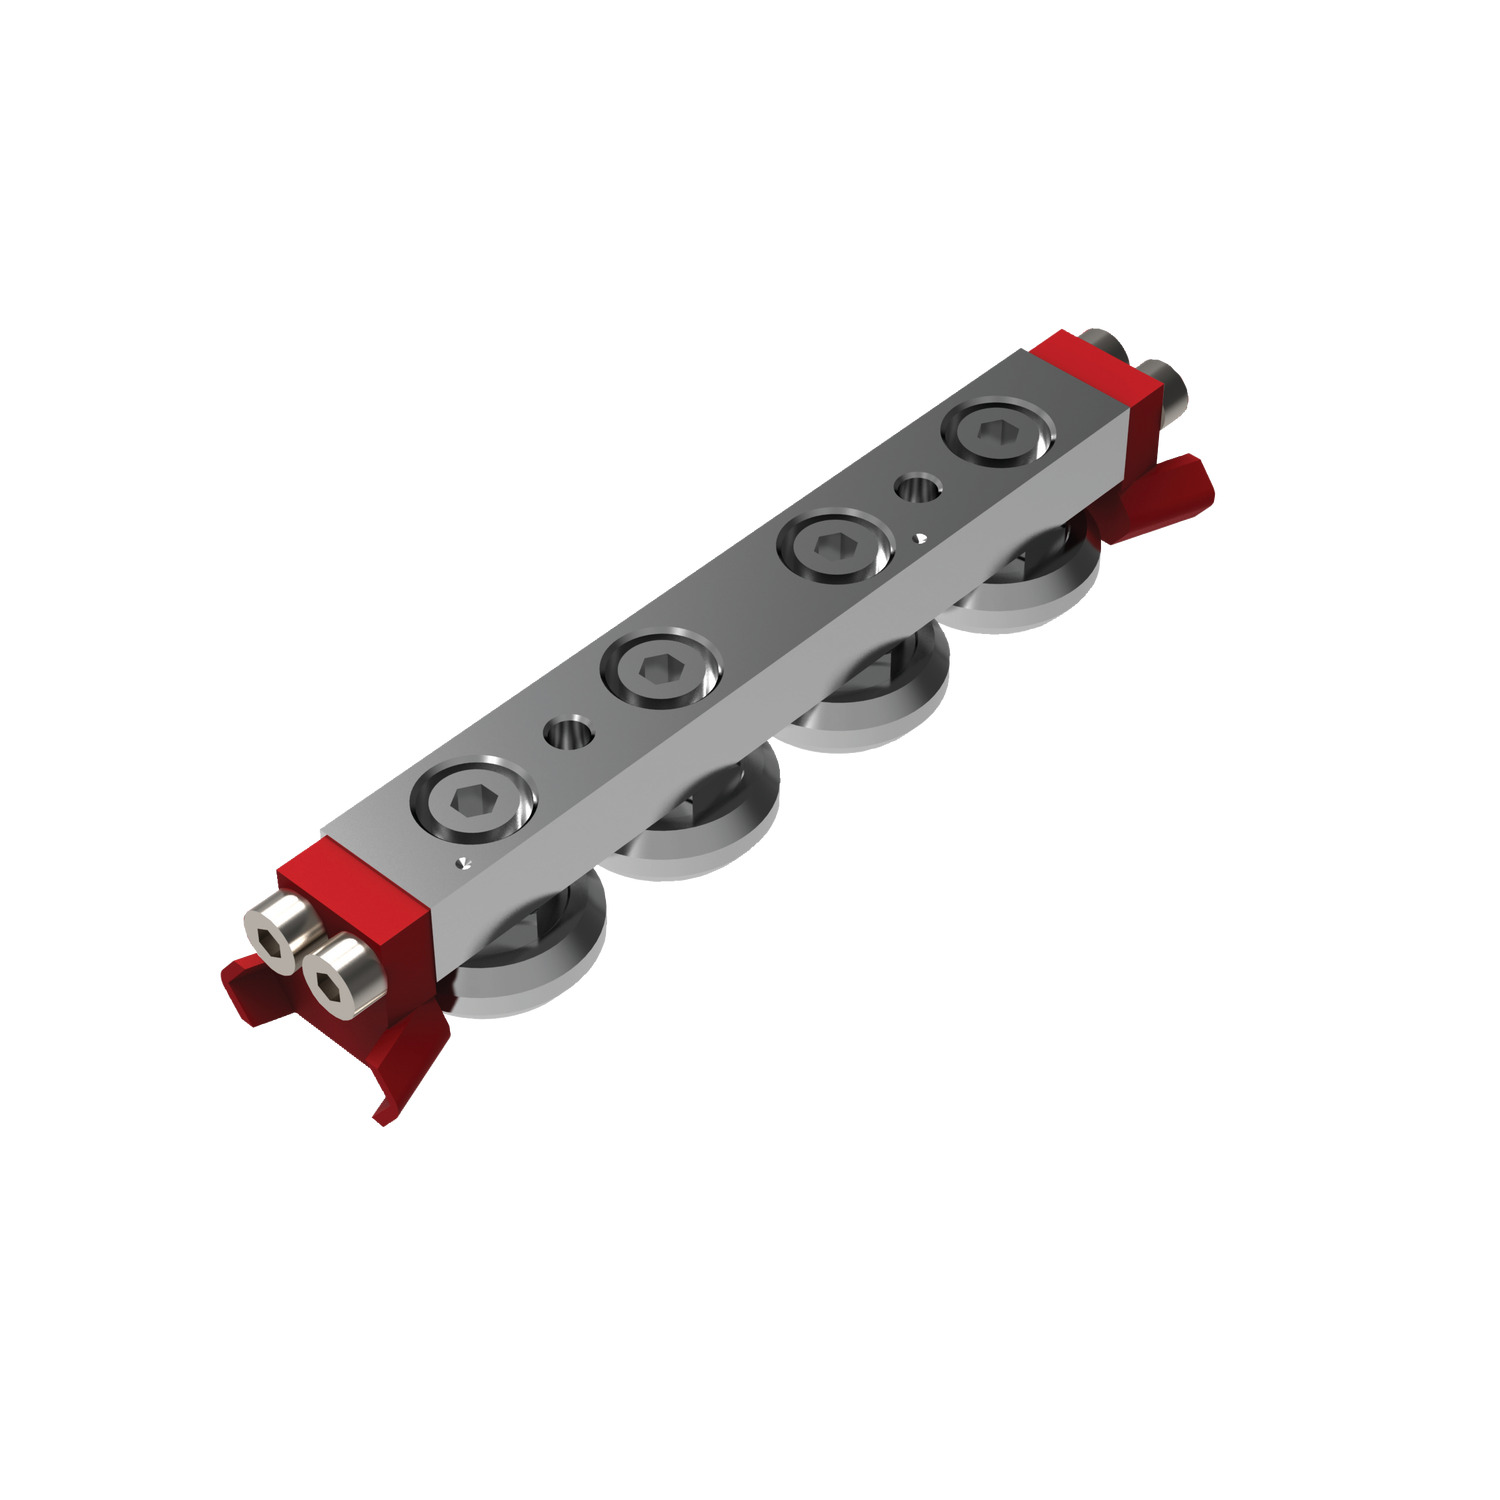 Medium Duty Sliders, size 35 Medium duty compact rail sliders. Front fixing, size 35 without side seal.